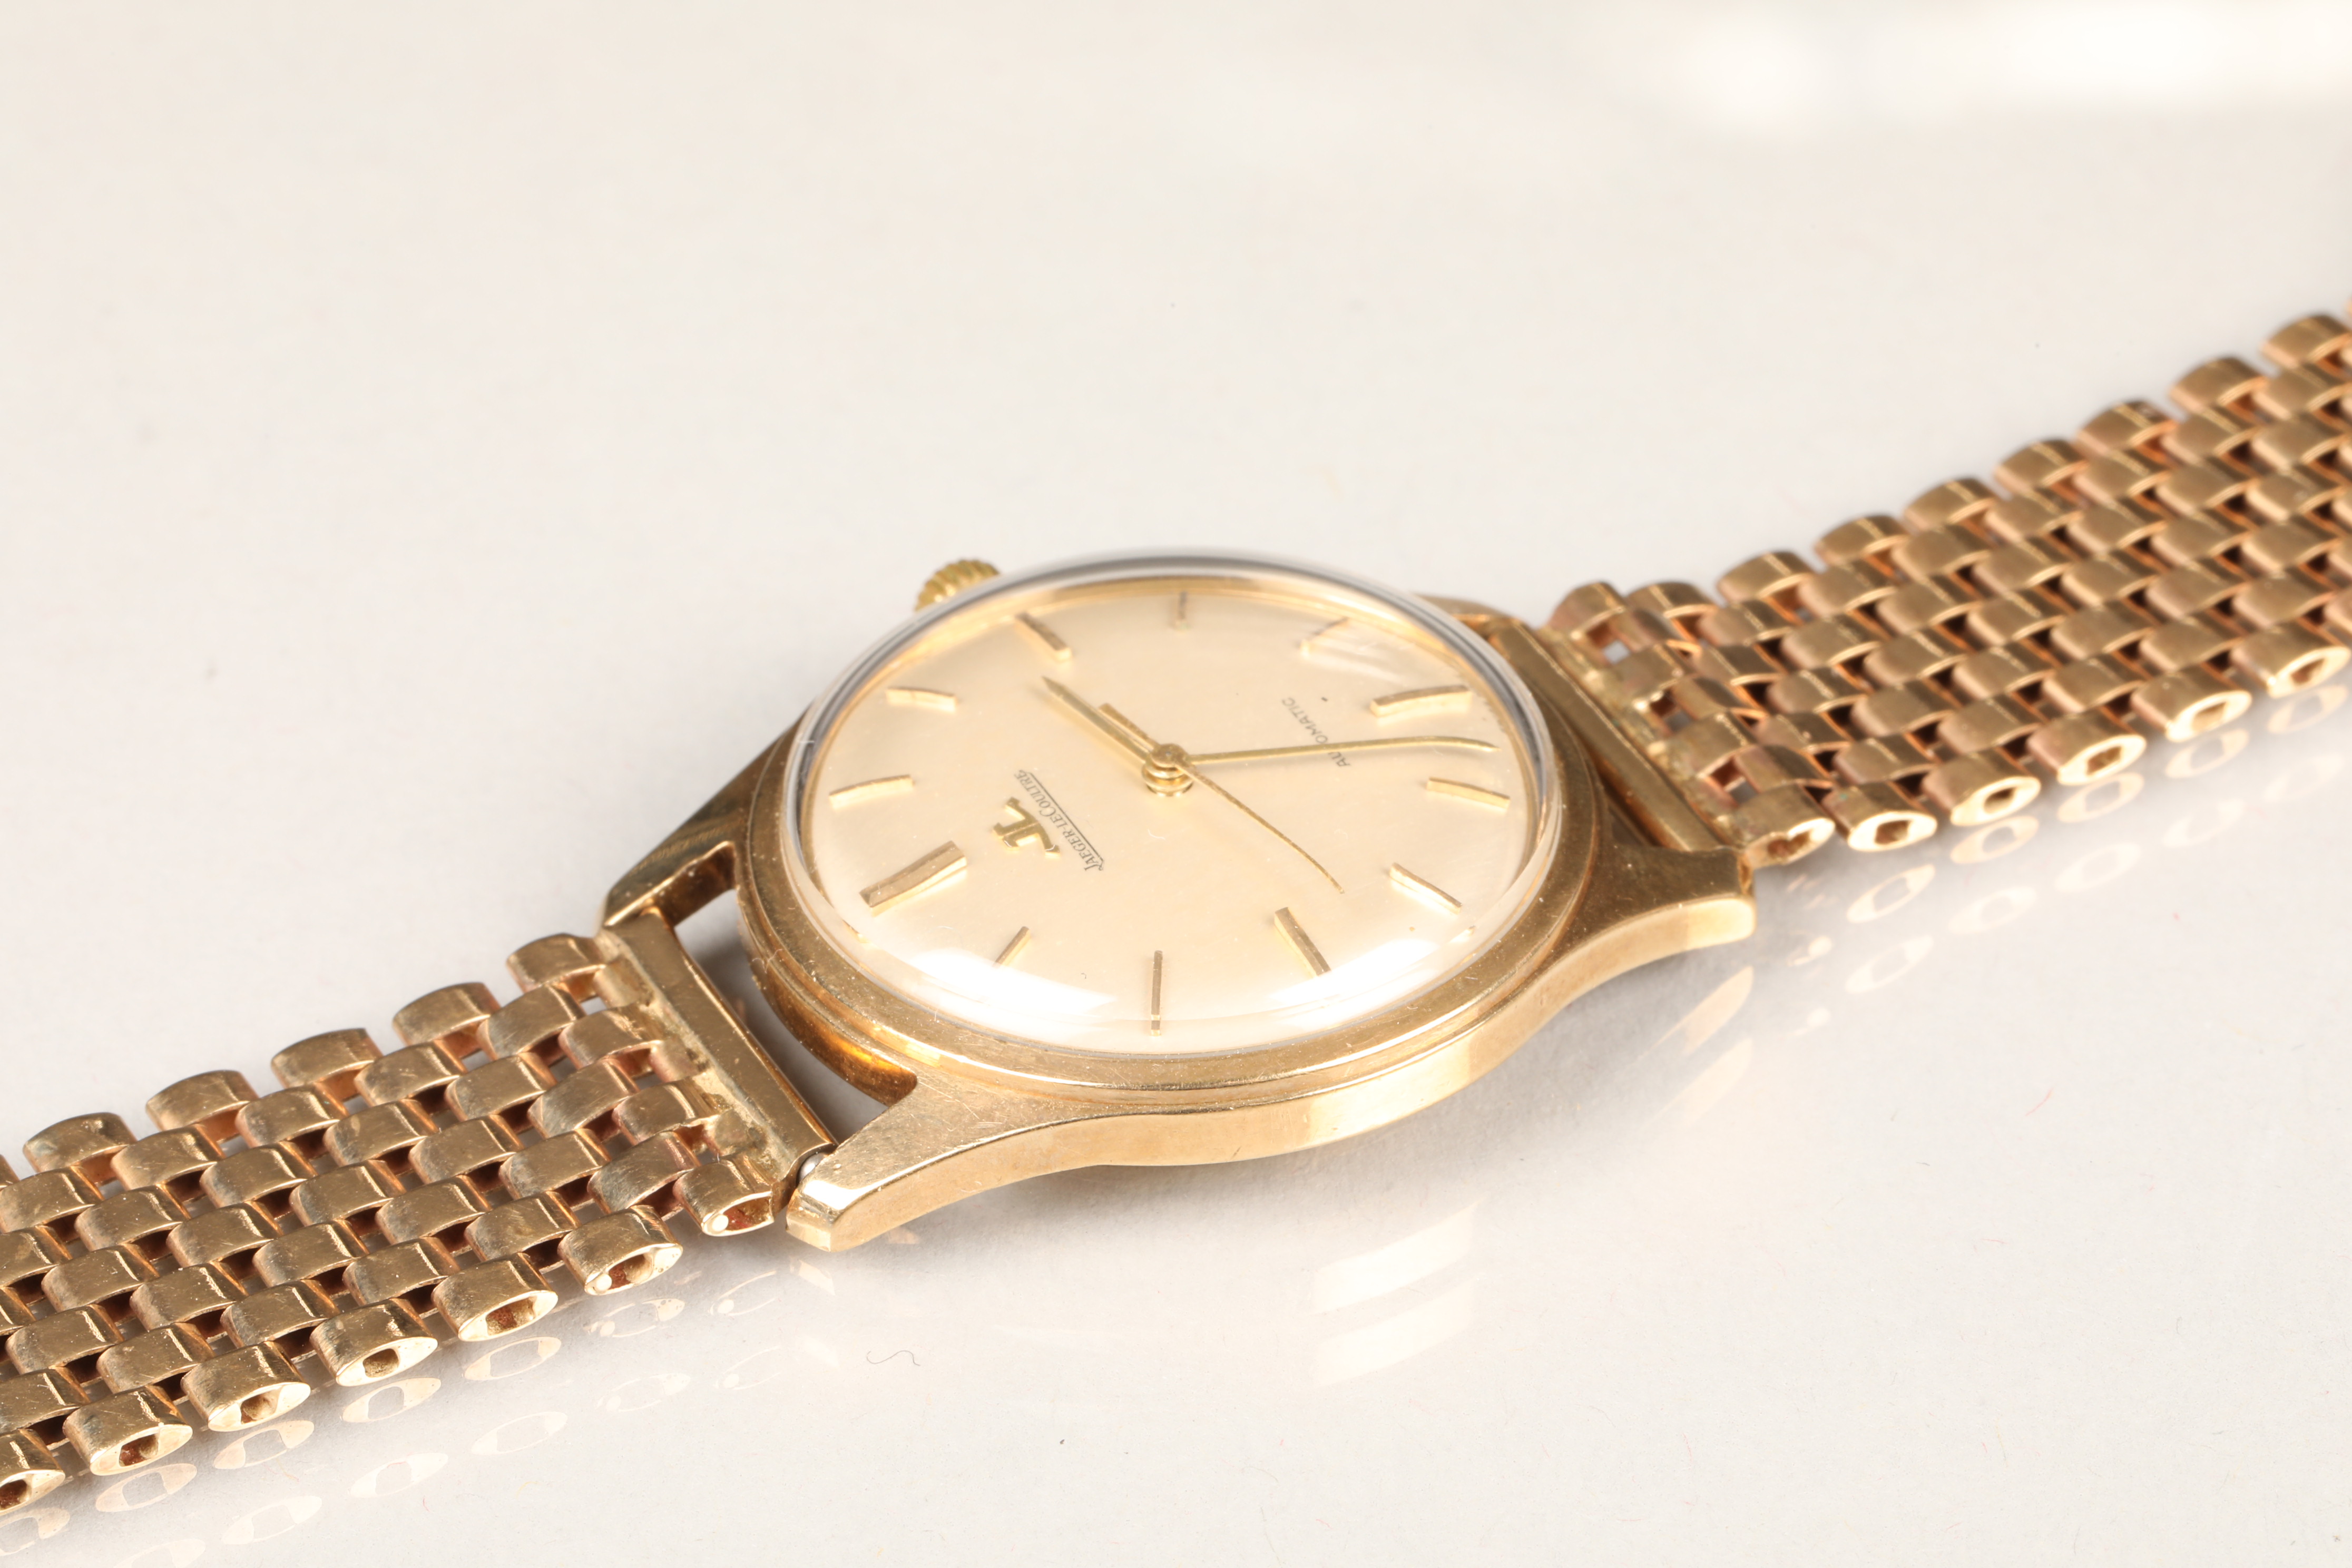 Gents 9 carat gold Jaeger-LeCoultre wristwatch, champagne dial with gilt baton hour markers, - Image 5 of 12